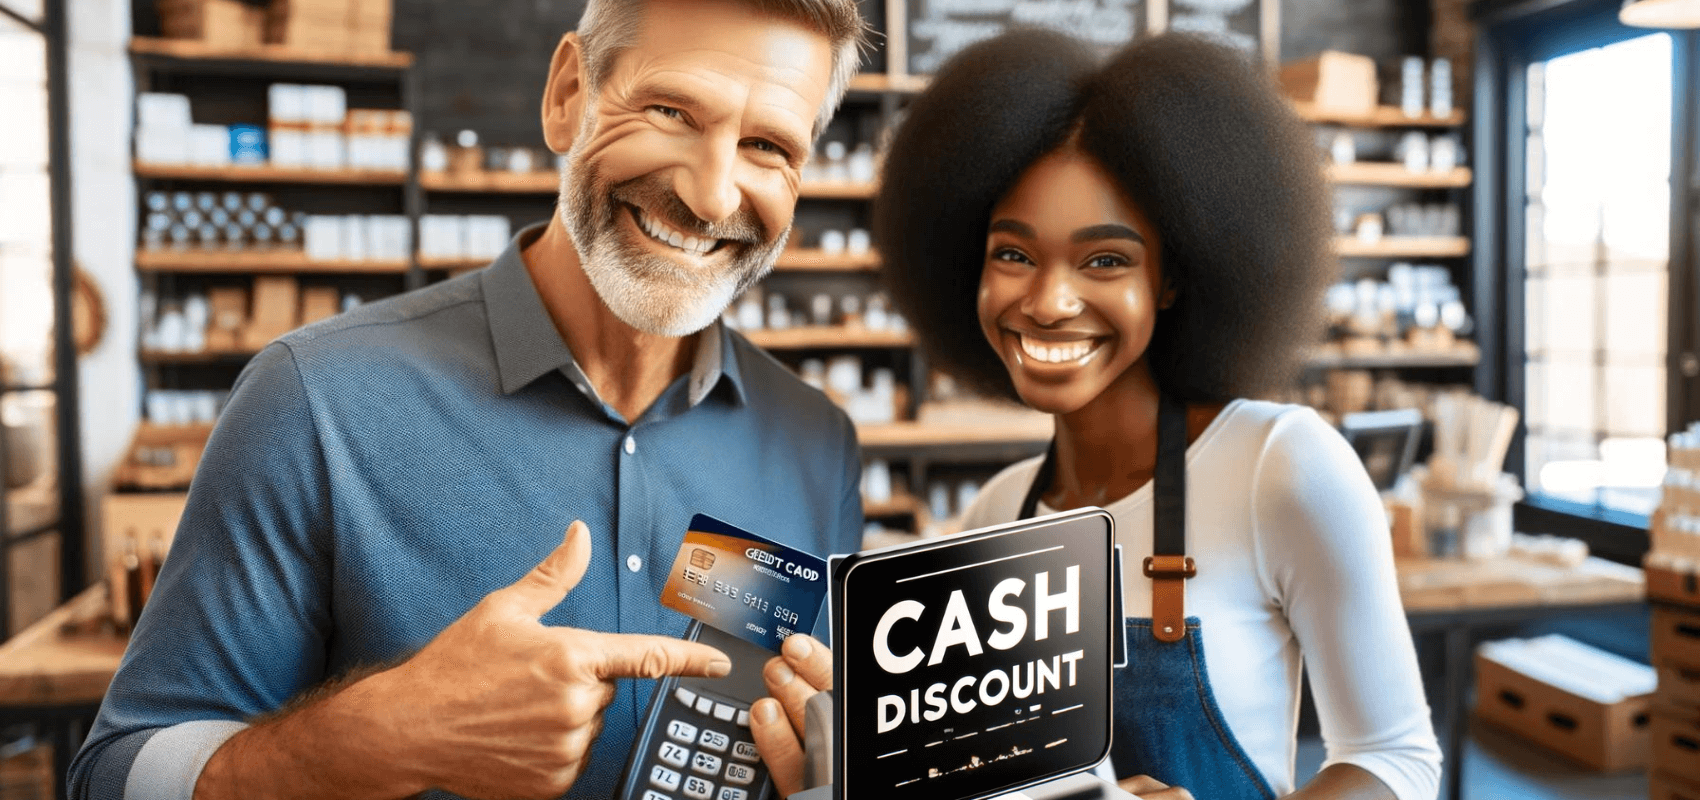 cash discounting to implement zero cost credit card processing